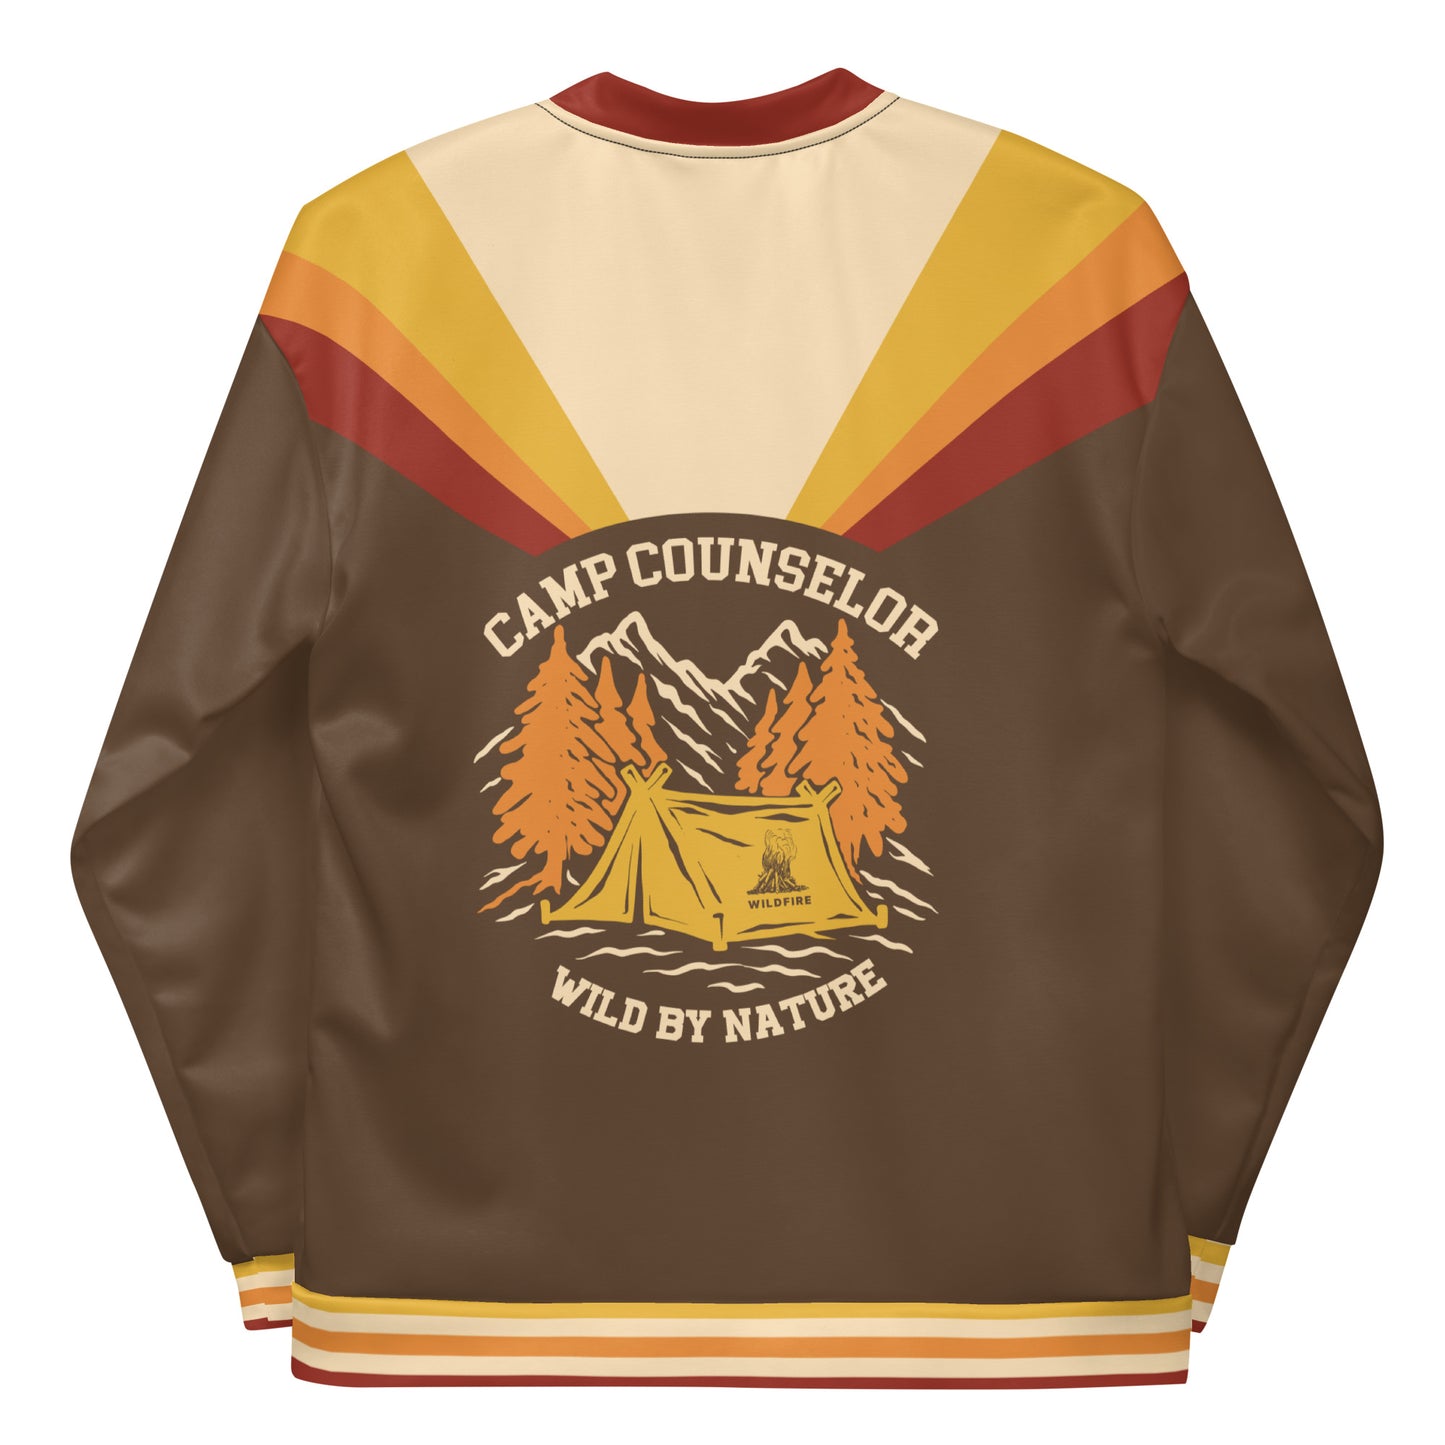 Wildfire Cigars Camp Counselor all over printed light jacket in brown, red, gold, and cream facing the back